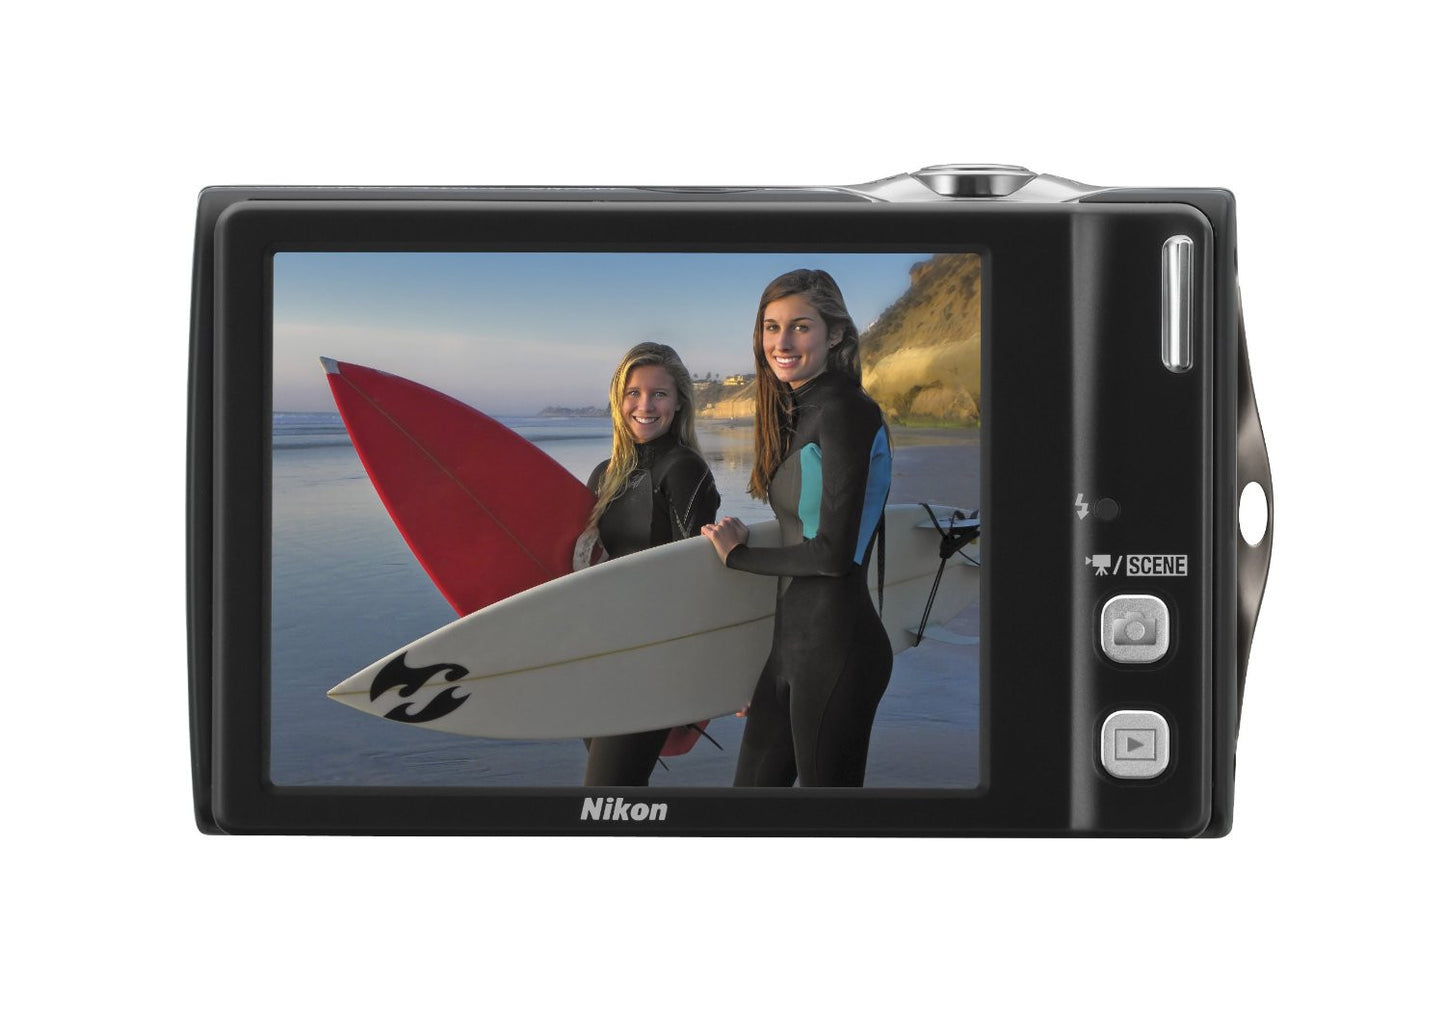 Nikon Coolpix S4000 12 MP Digital Camera with 4x Optical Vibration Reduction (VR) Zoom and 3.0-Inch Touch-Panel LCD (Black) - worldtradesolution.com
 - 2